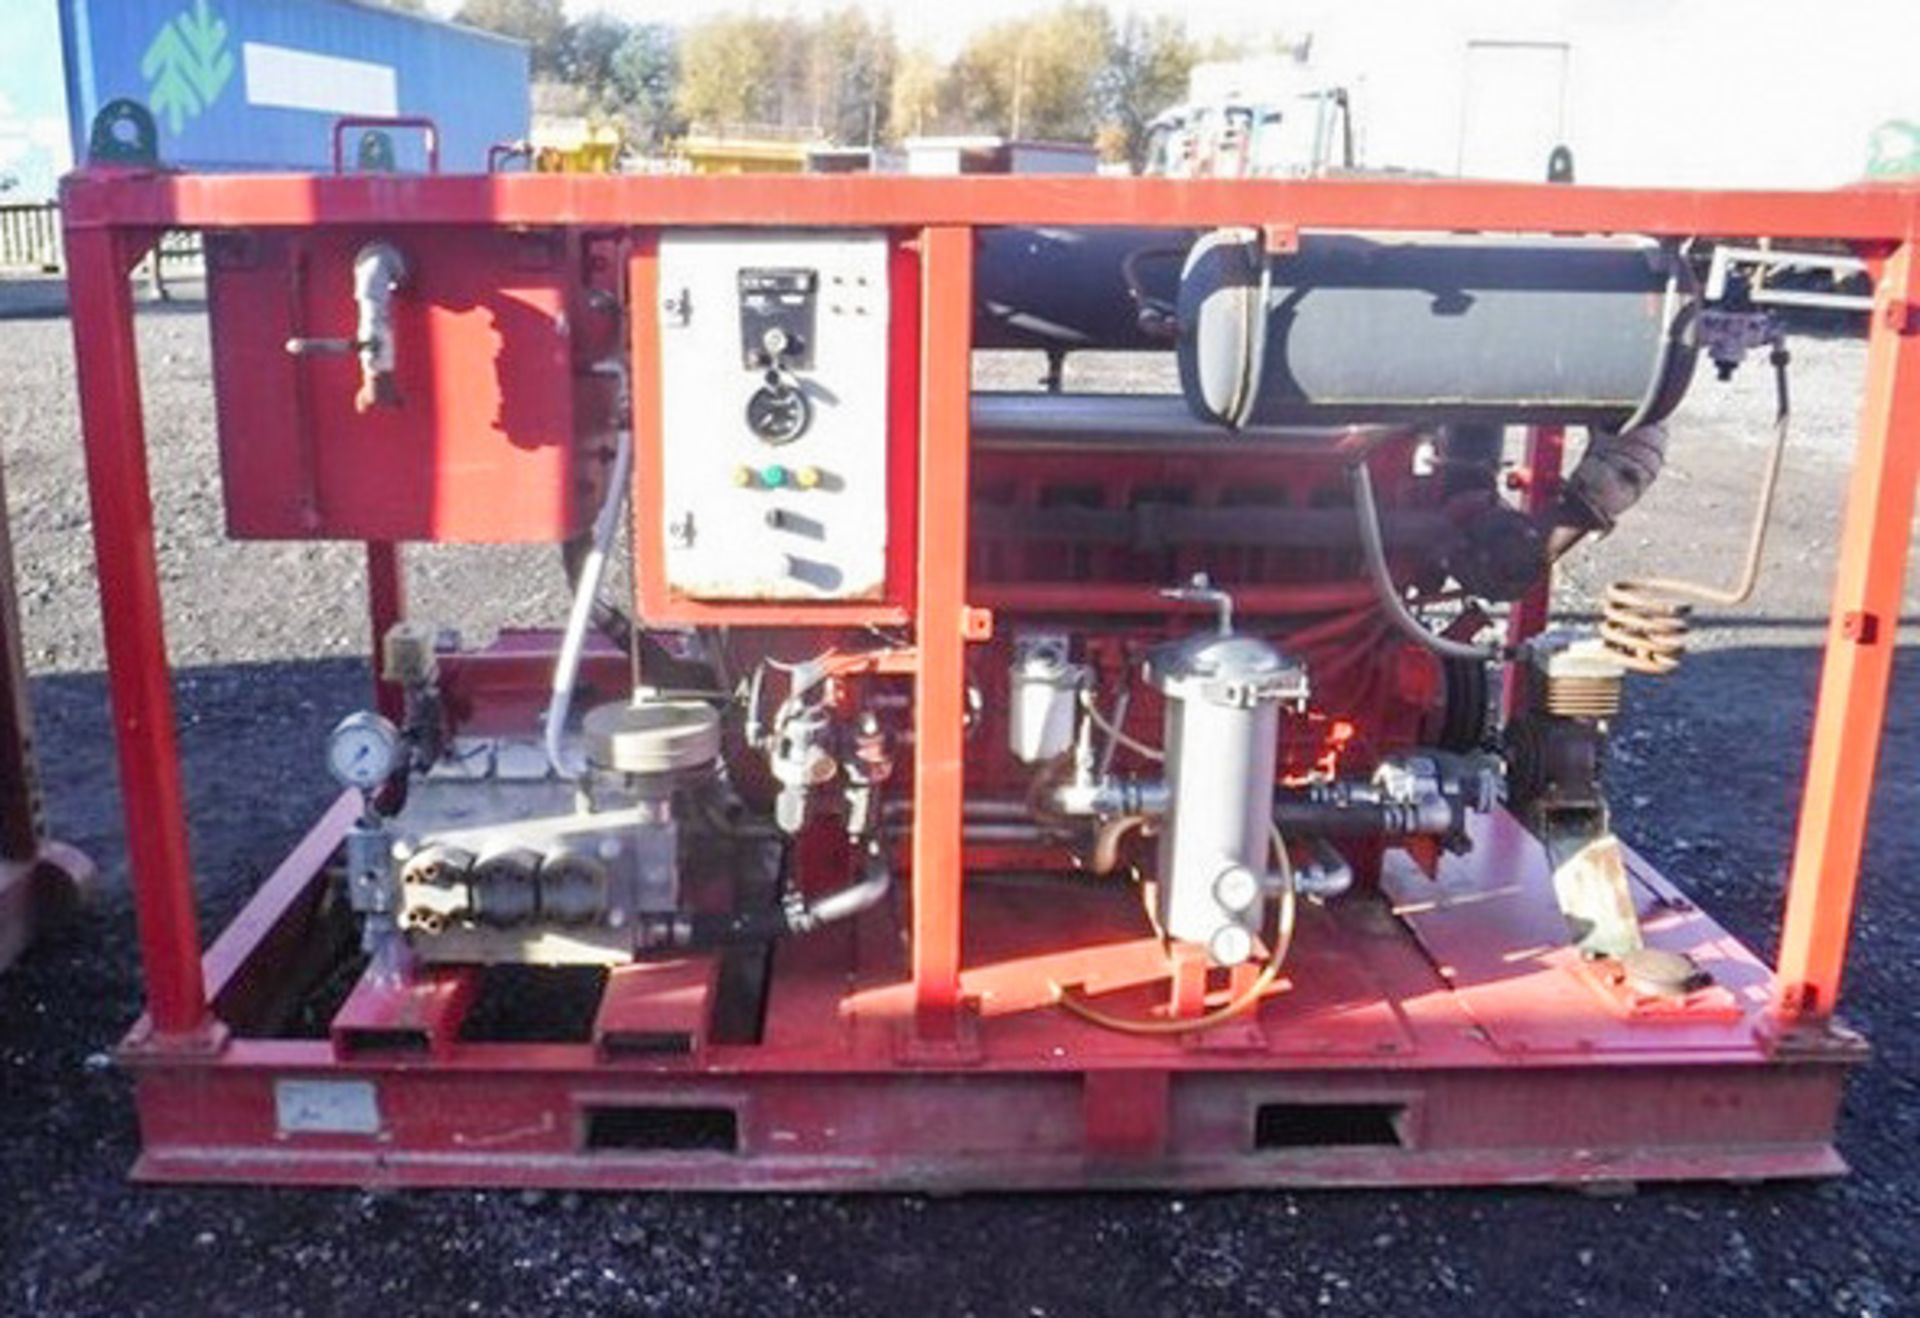 V8 HIGH PRESSURE HYDRAULIC PUMP SKID MOUNTED. (RED), NO PLATES OR ID NUMBERS